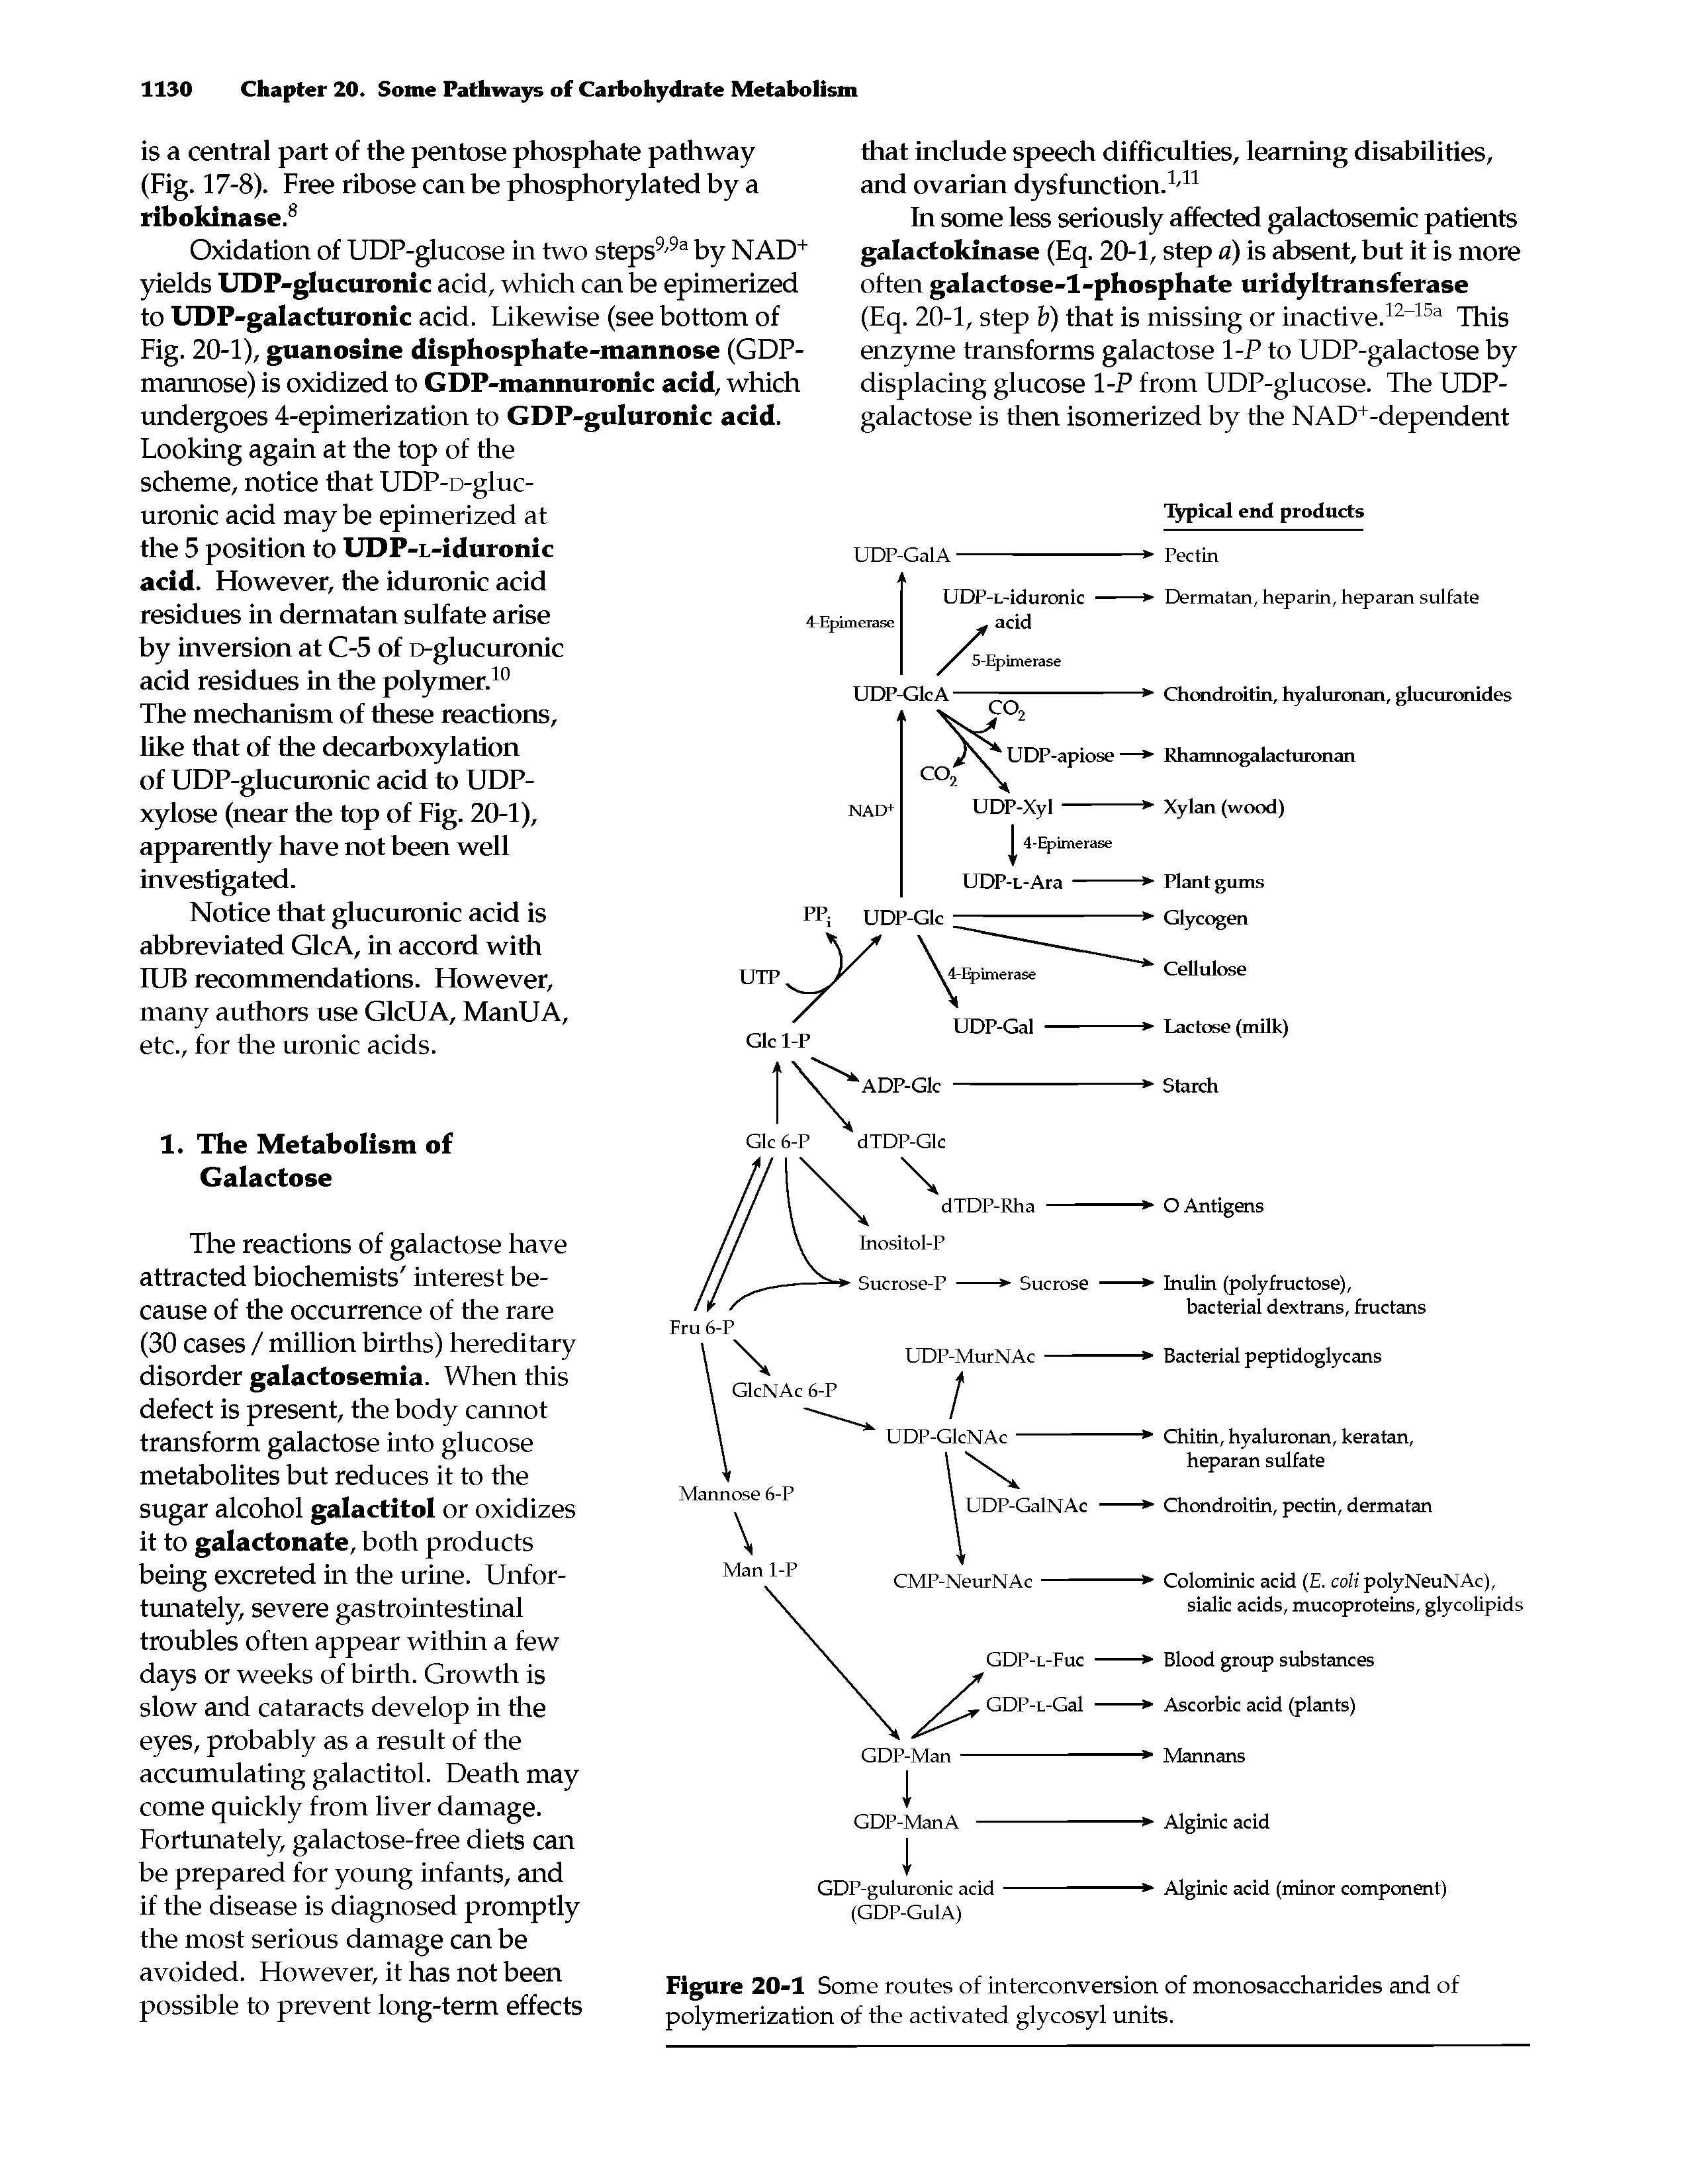 Figure 20-1 Some routes of interconversion of monosaccharides and of polymerization of the activated glycosyl units.